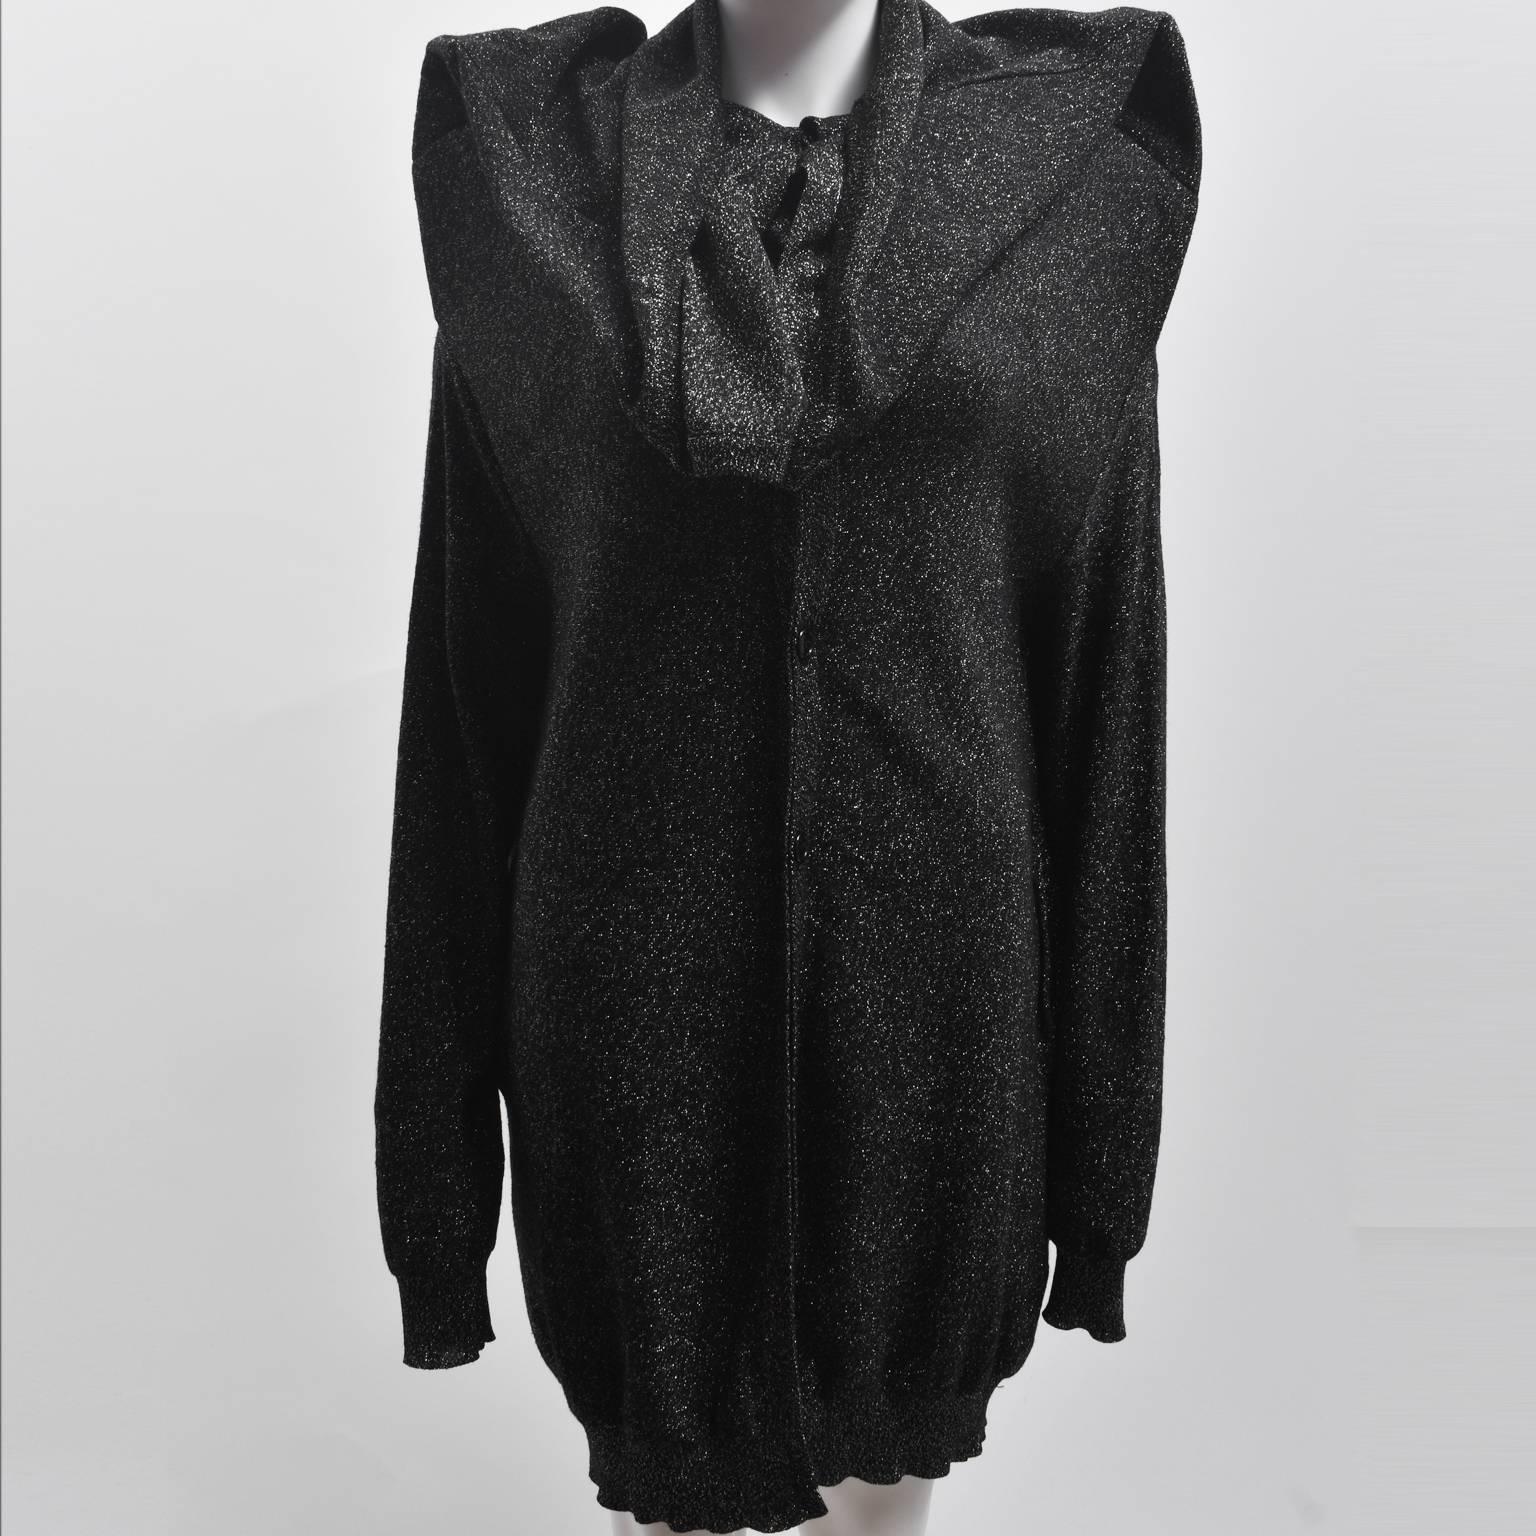 A theatrical and avant-garde black and silver glitter knit from Maison Martin Margiela. The longline jumper has a button down front and long sleeves and features structured inserts in the shoulders that create an exaggerated shoulder silhouette.